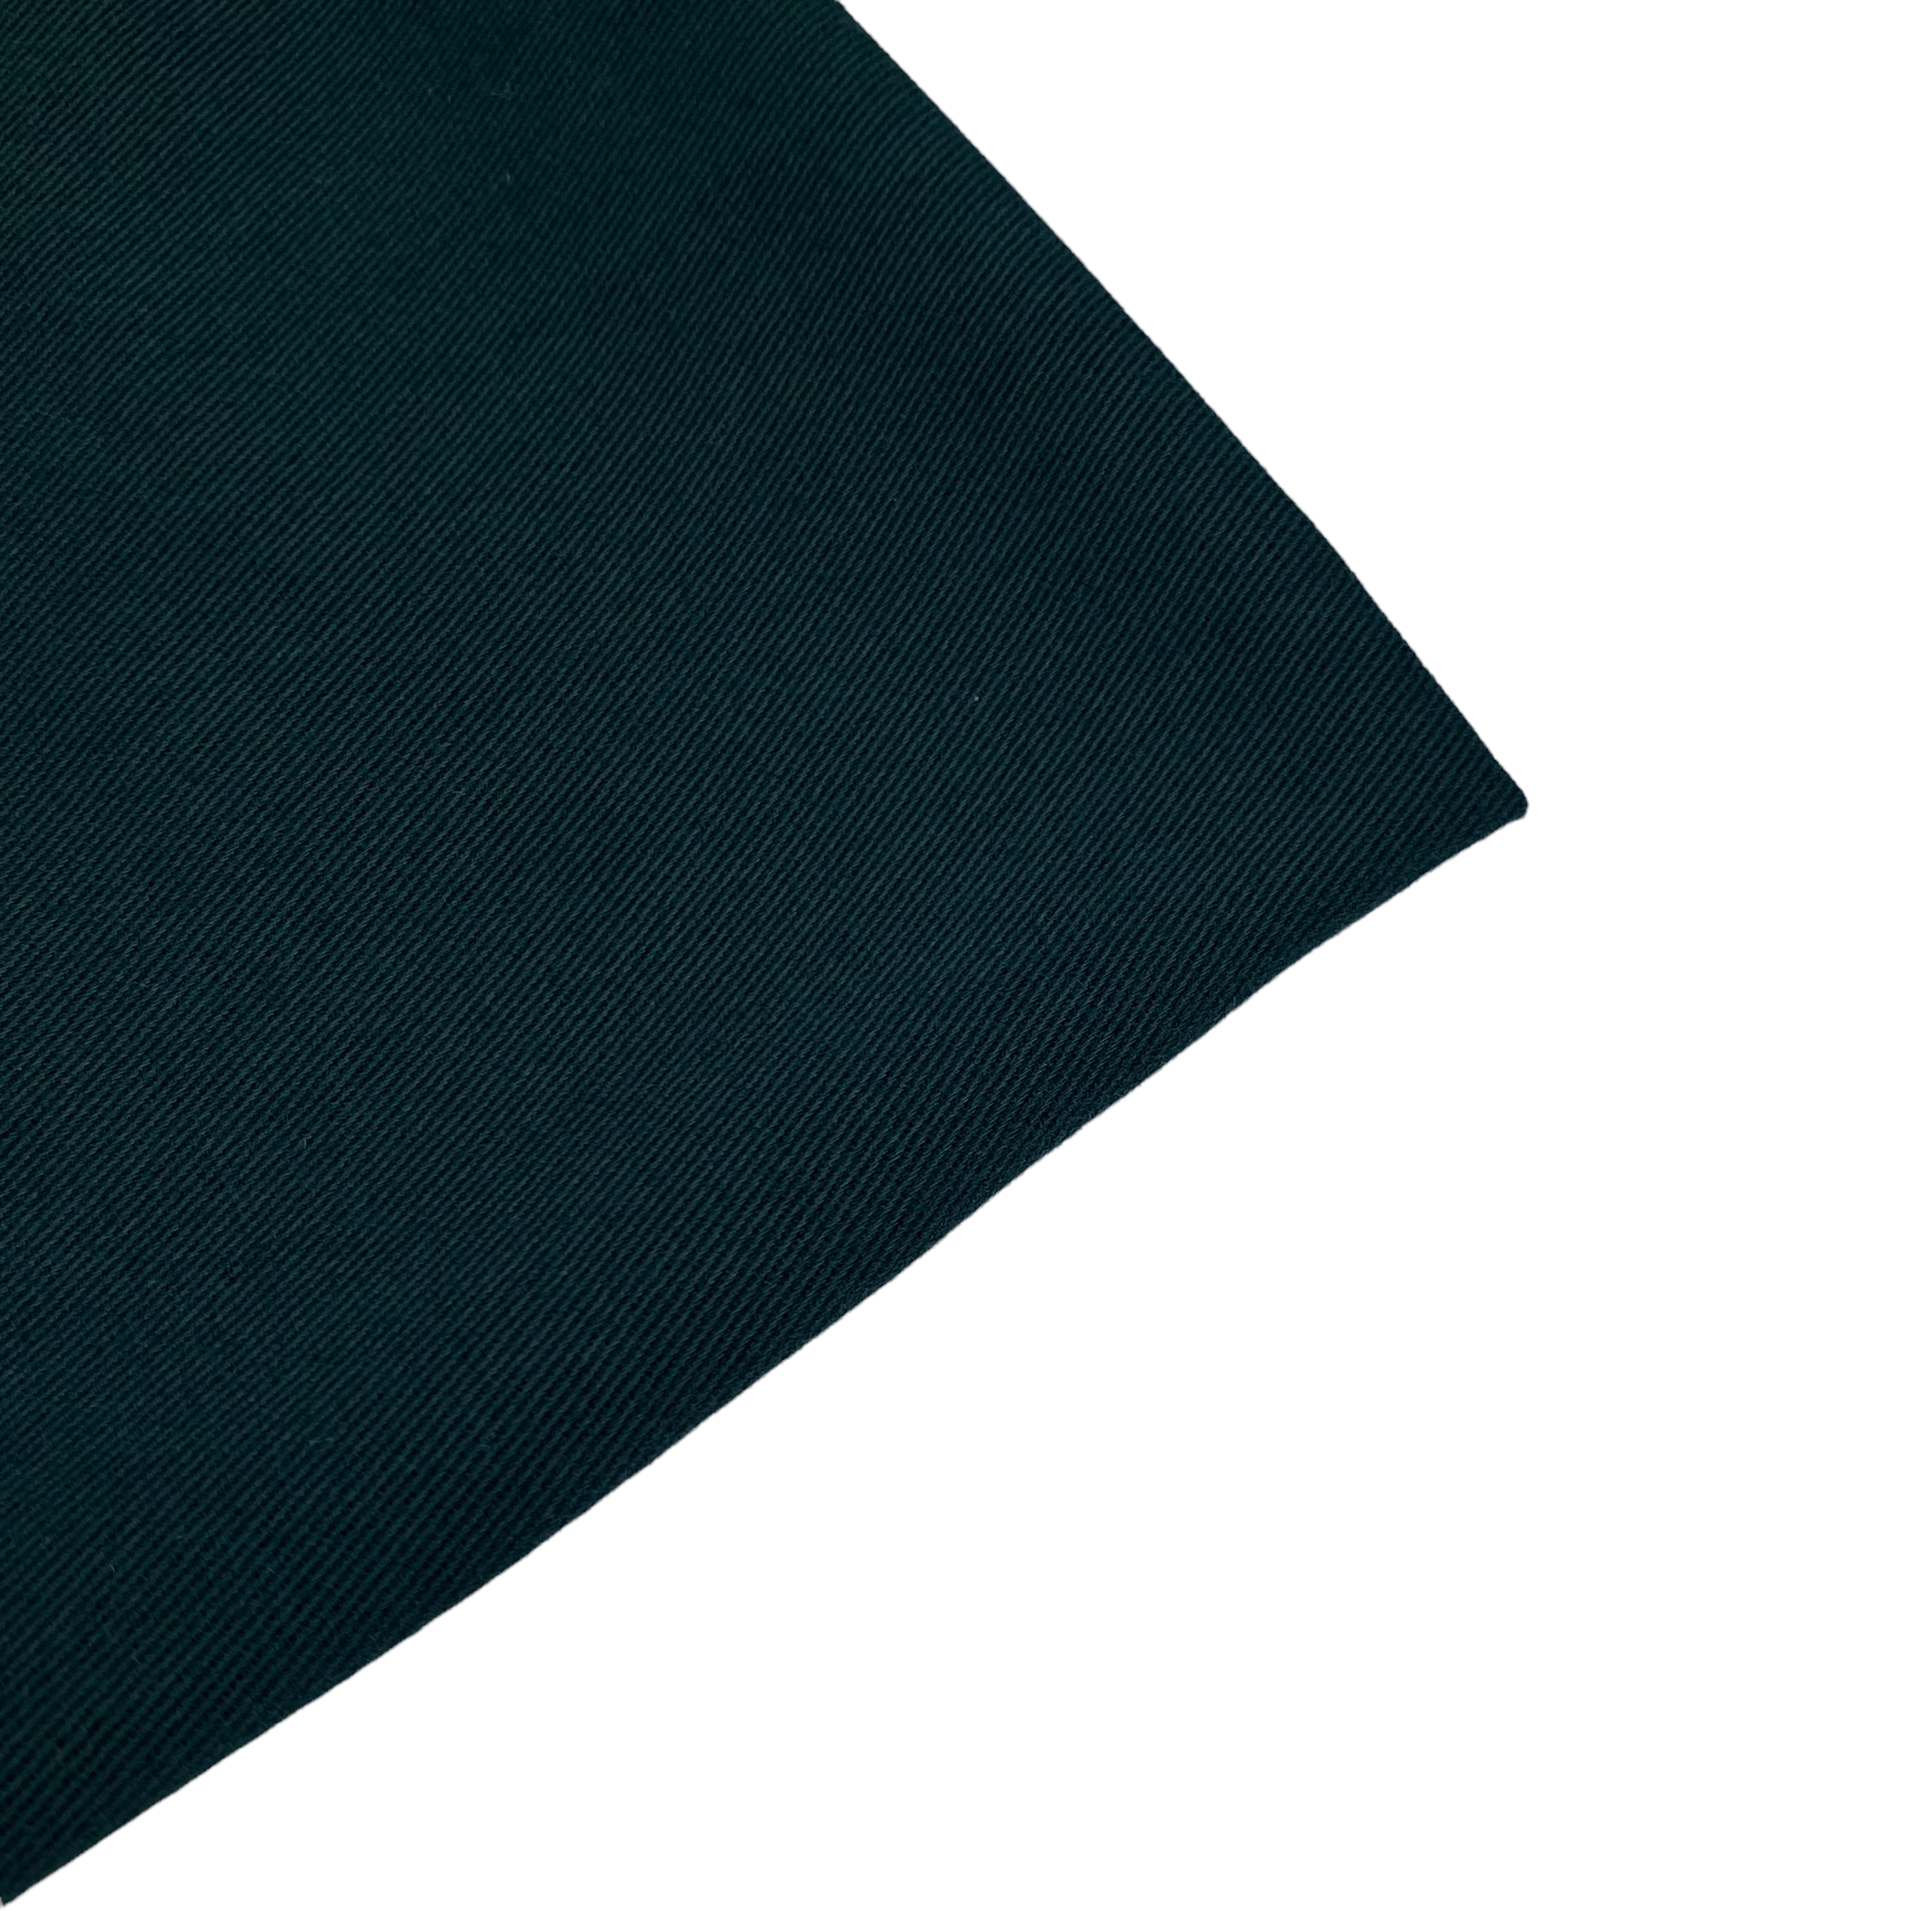 Twill Brushed Cotton Canvas - 6oz - 66” - Green